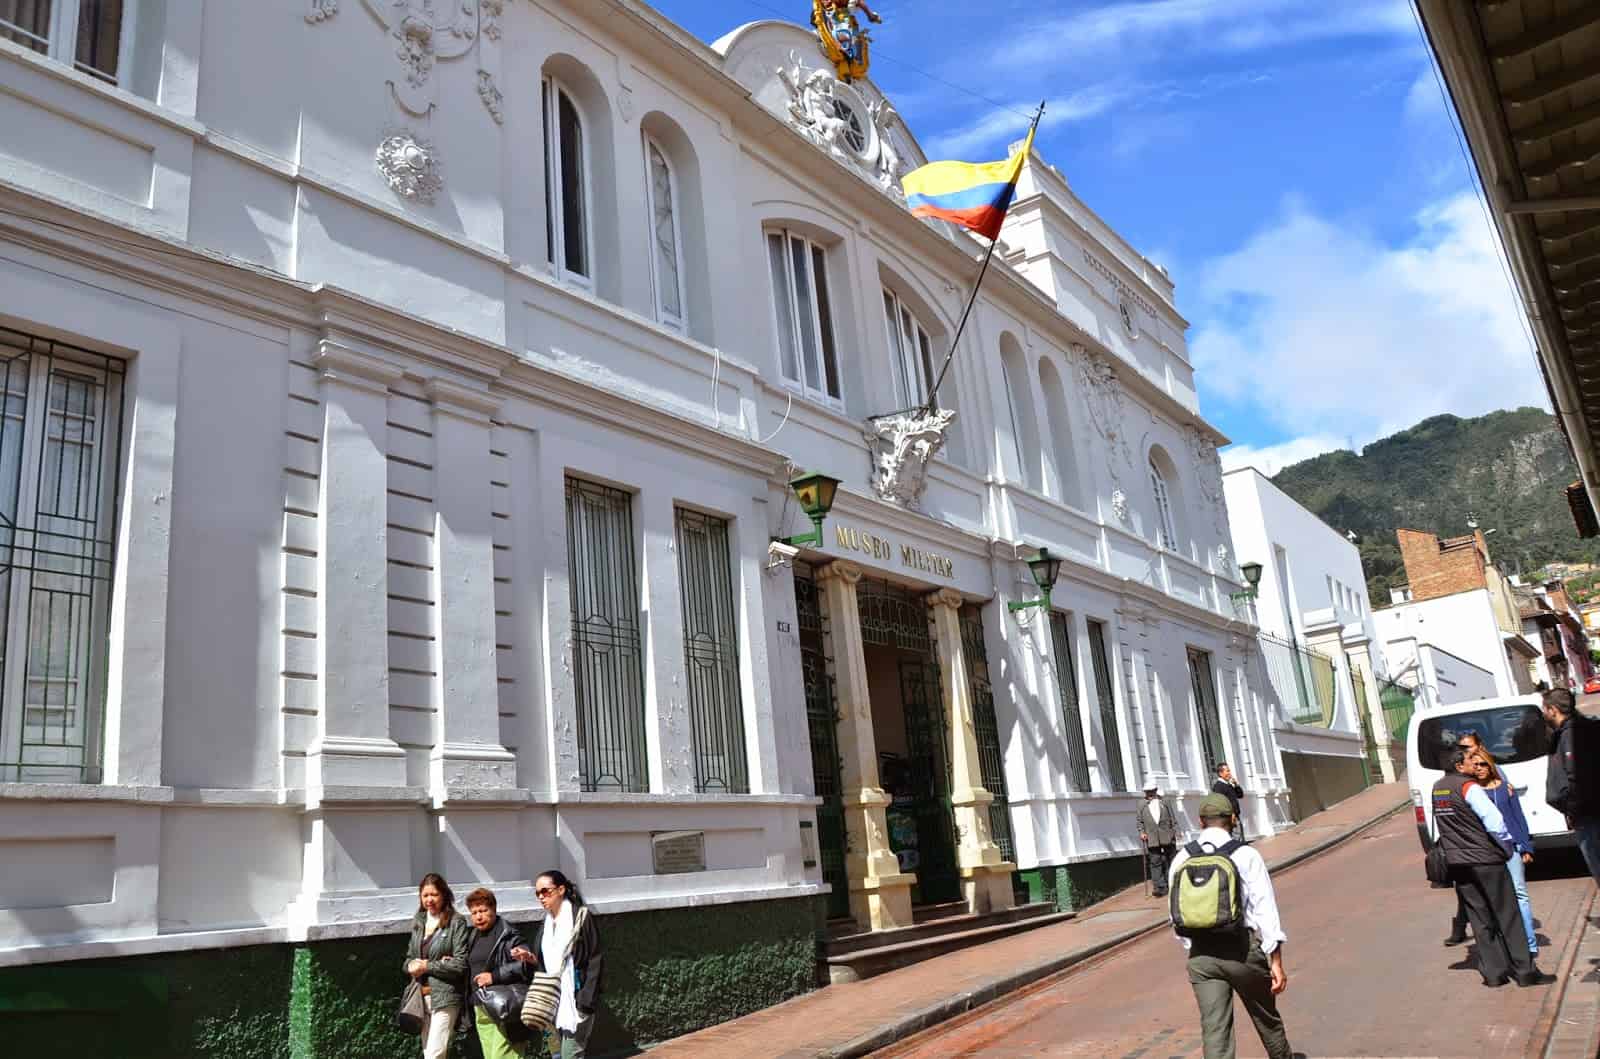 Military Museum Candelaria, Bogotá, Colombia